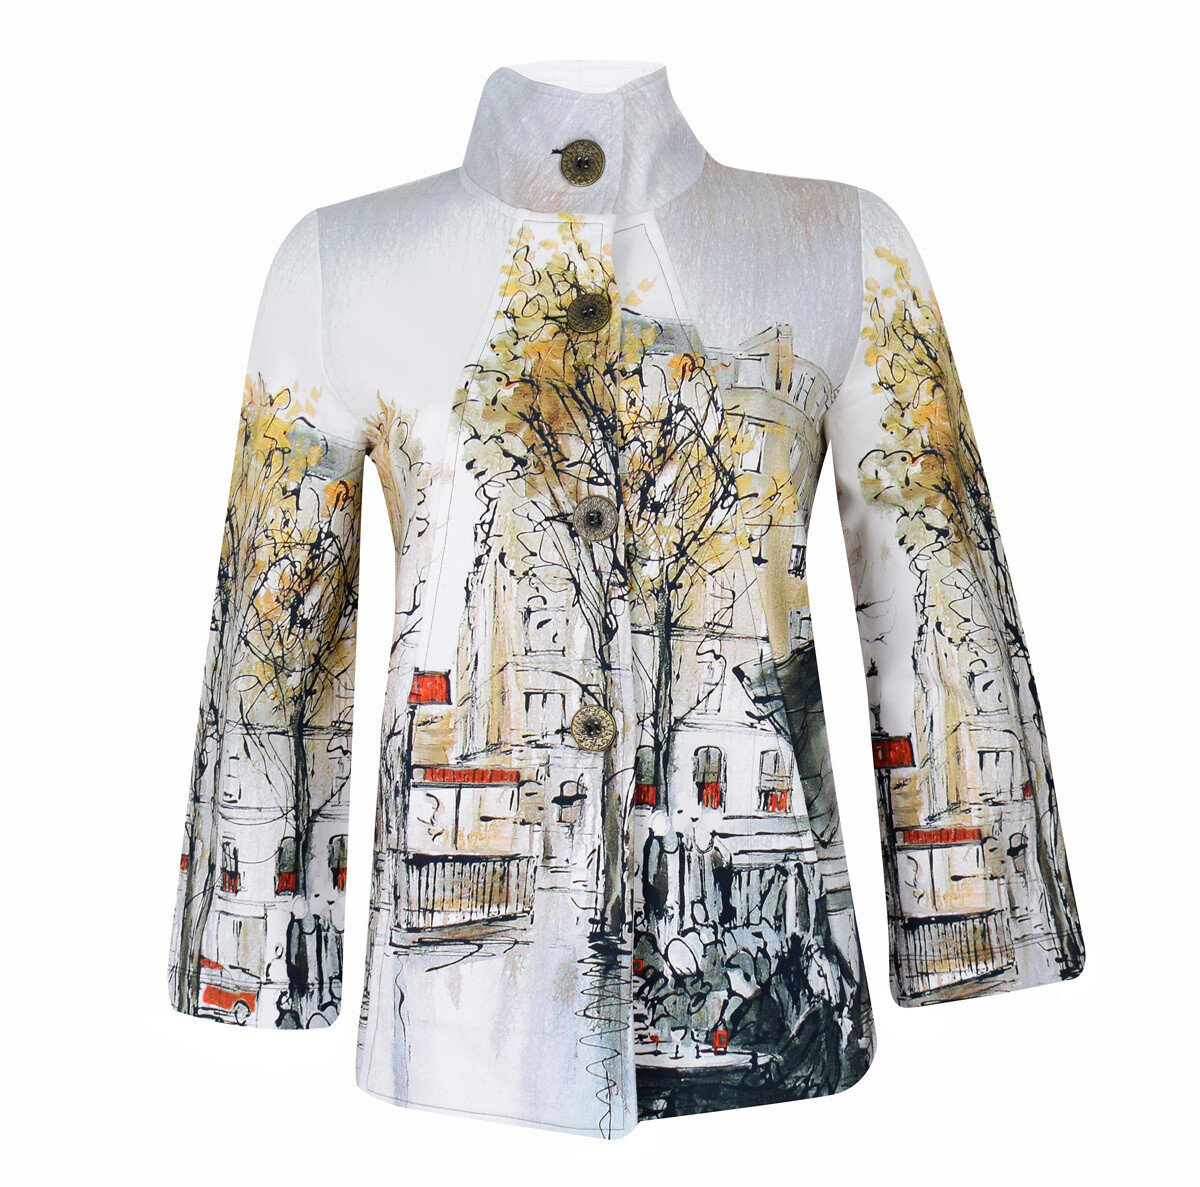 Simply Art Dolcezza: Splendid Parisian Life Swing Jacket SOLD OUT